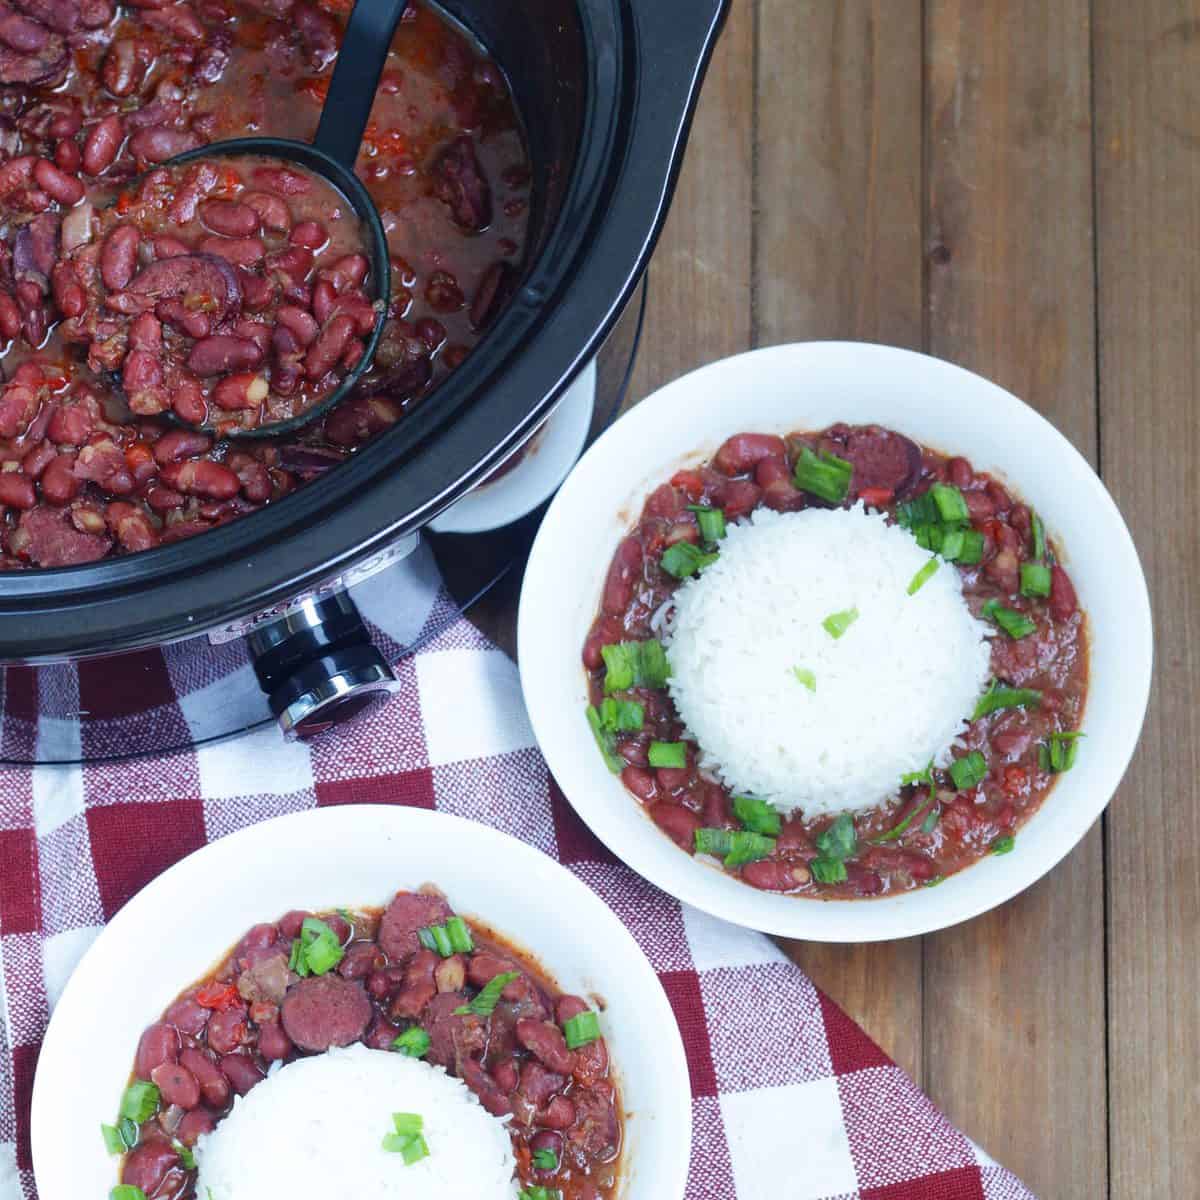 https://evseats.com/wp-content/uploads/2017/12/Cajun-Red-Beans-and-Rice-1-scaled.jpg